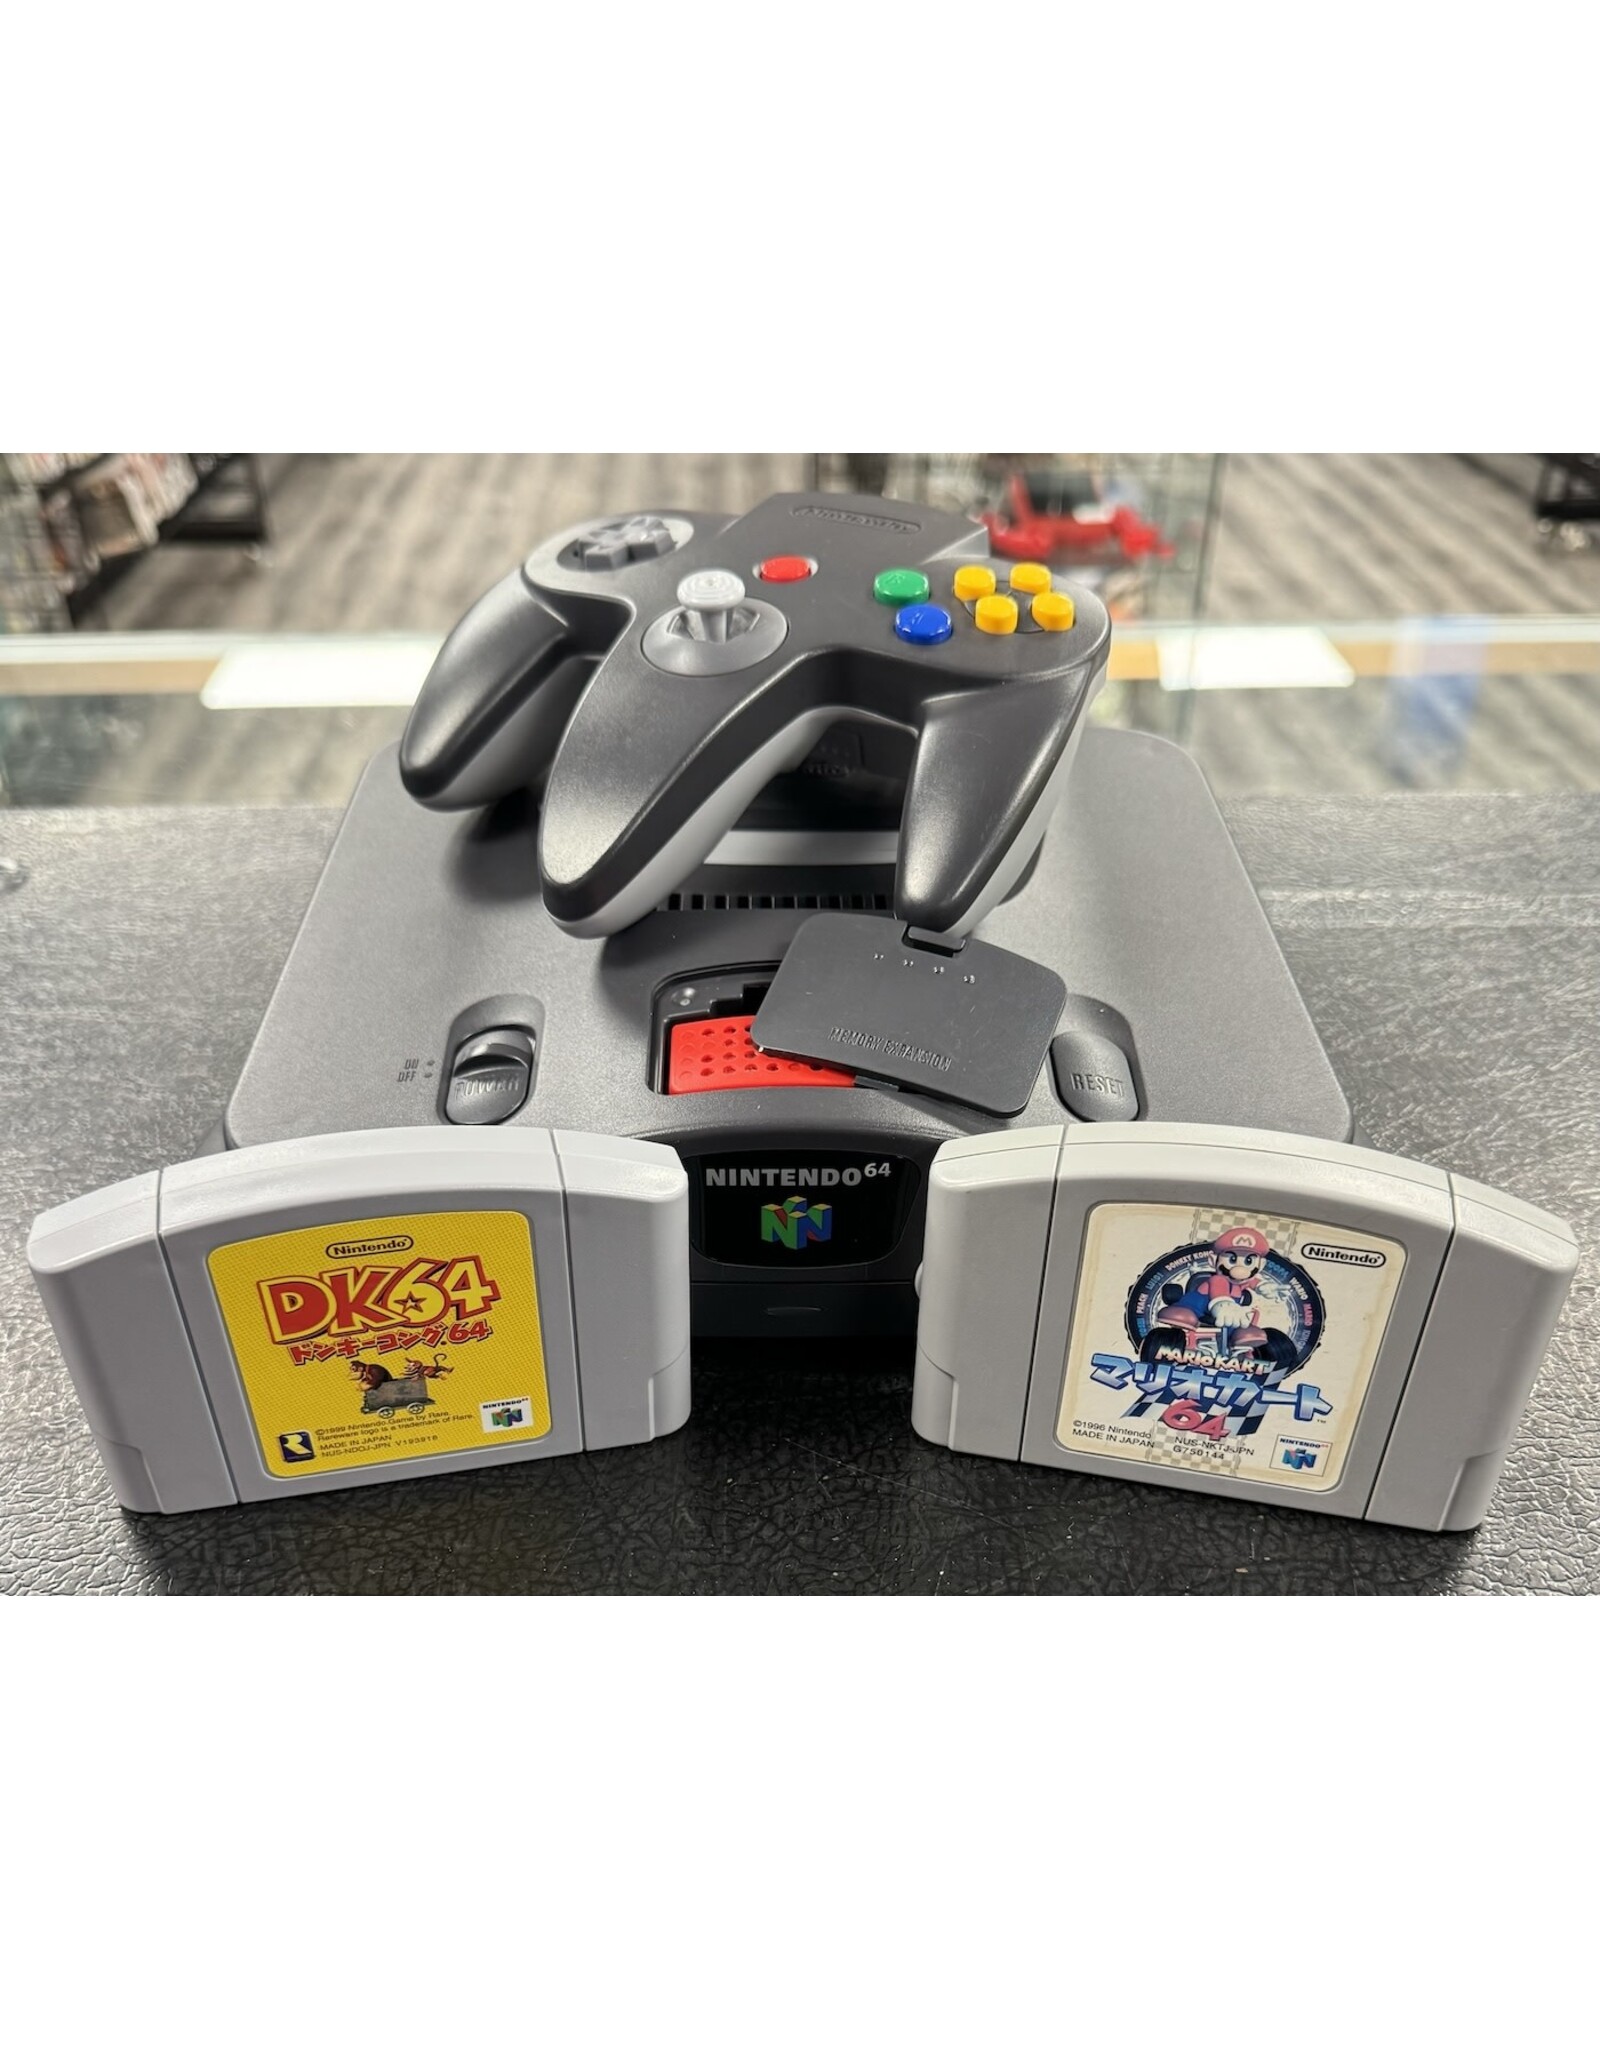 Nintendo 64 Nintendo 64 Console - Japanese with Mario Kart 64 Cart/Controller, Donkey Kong 64, and Expansion Pak (Used, MK64 has Damaged Front and Back Labels, JP Import)